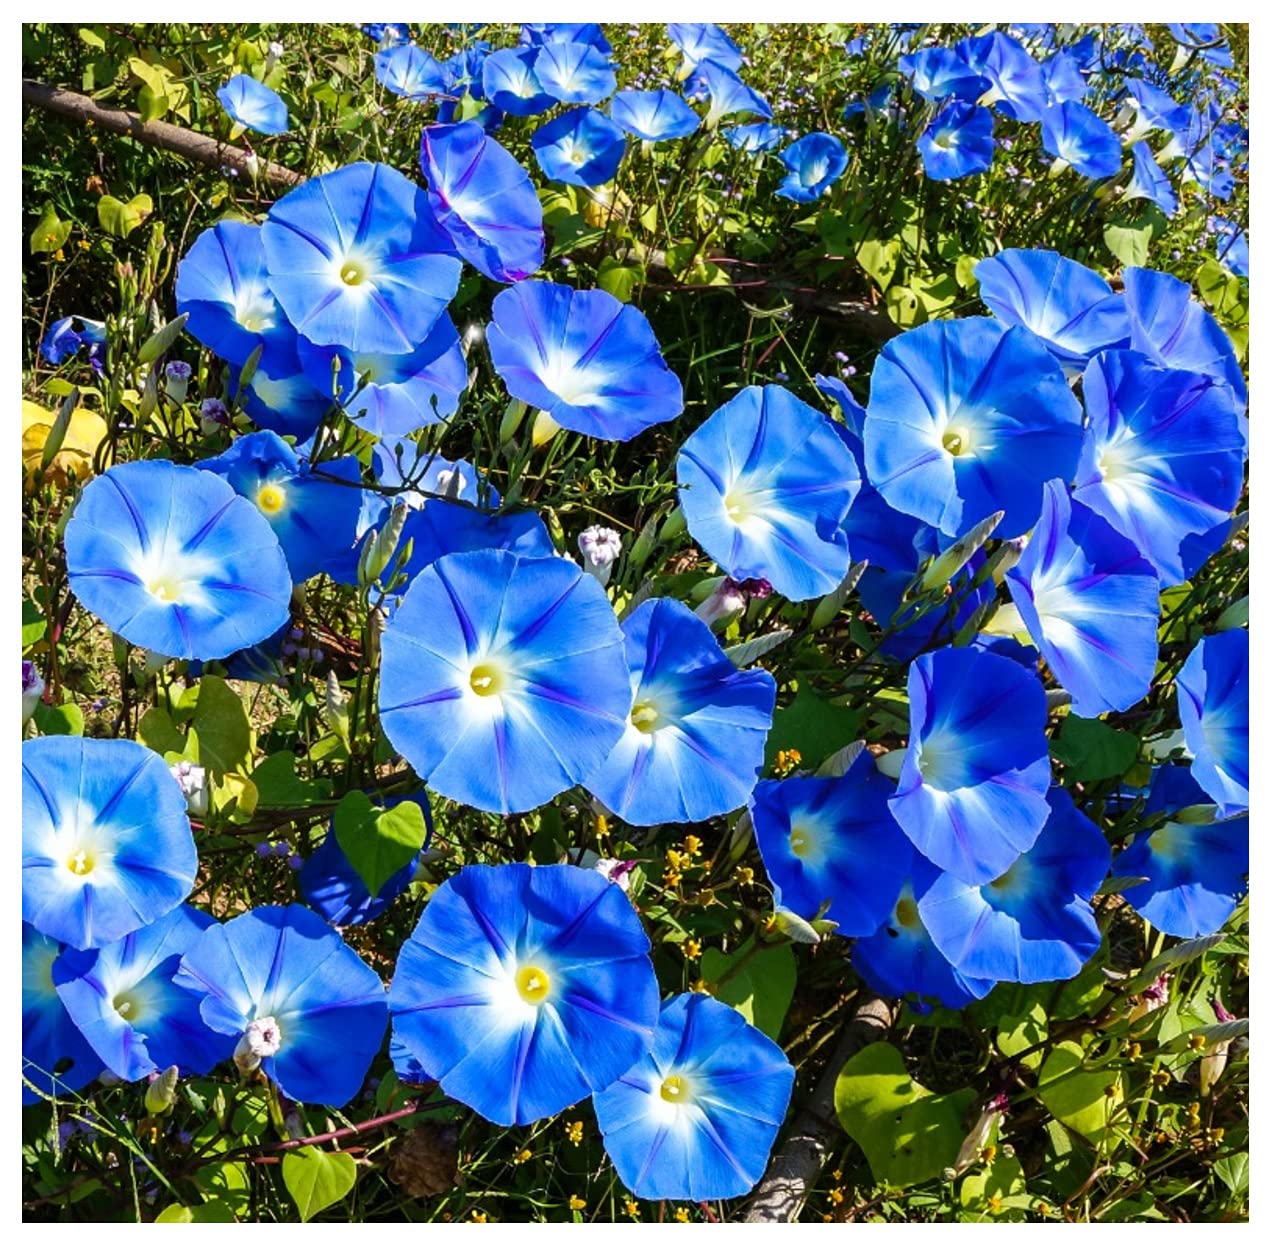 250 Heavenly Blue Morning Blooming Vine Seeds - Wonderful Climbing Heirloom Vine - Non GMO and Neonicotinoid Seed. Marde Ross & Company